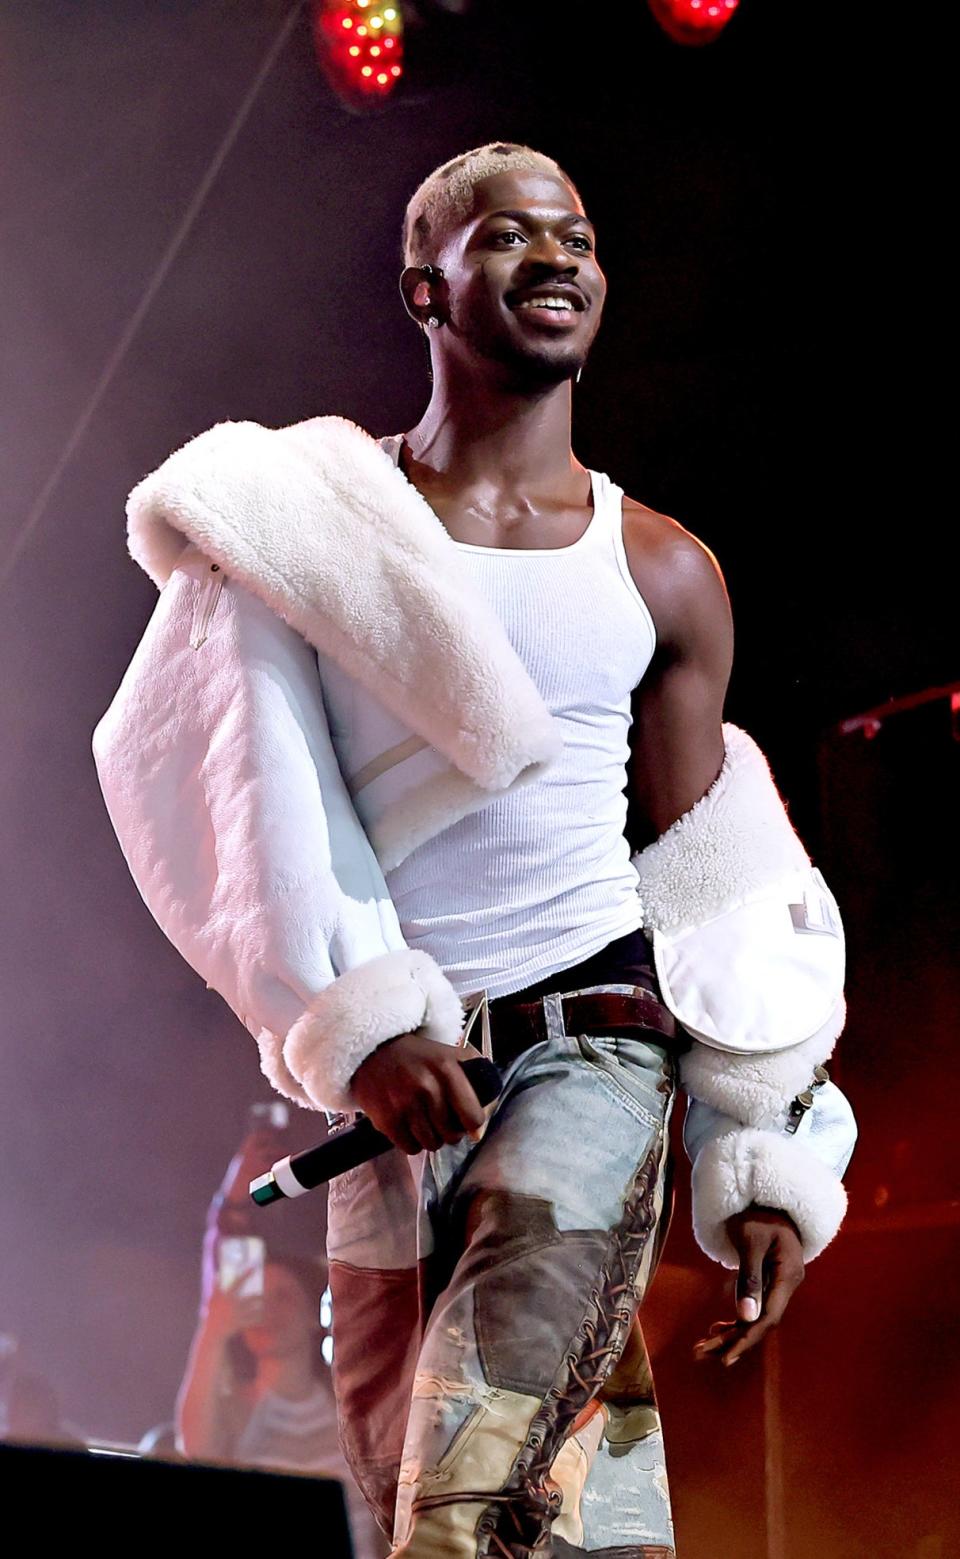 Lil Nas X is performing on stage, wearing a tank top, a fur coat draped over his shoulder, and patchwork jeans